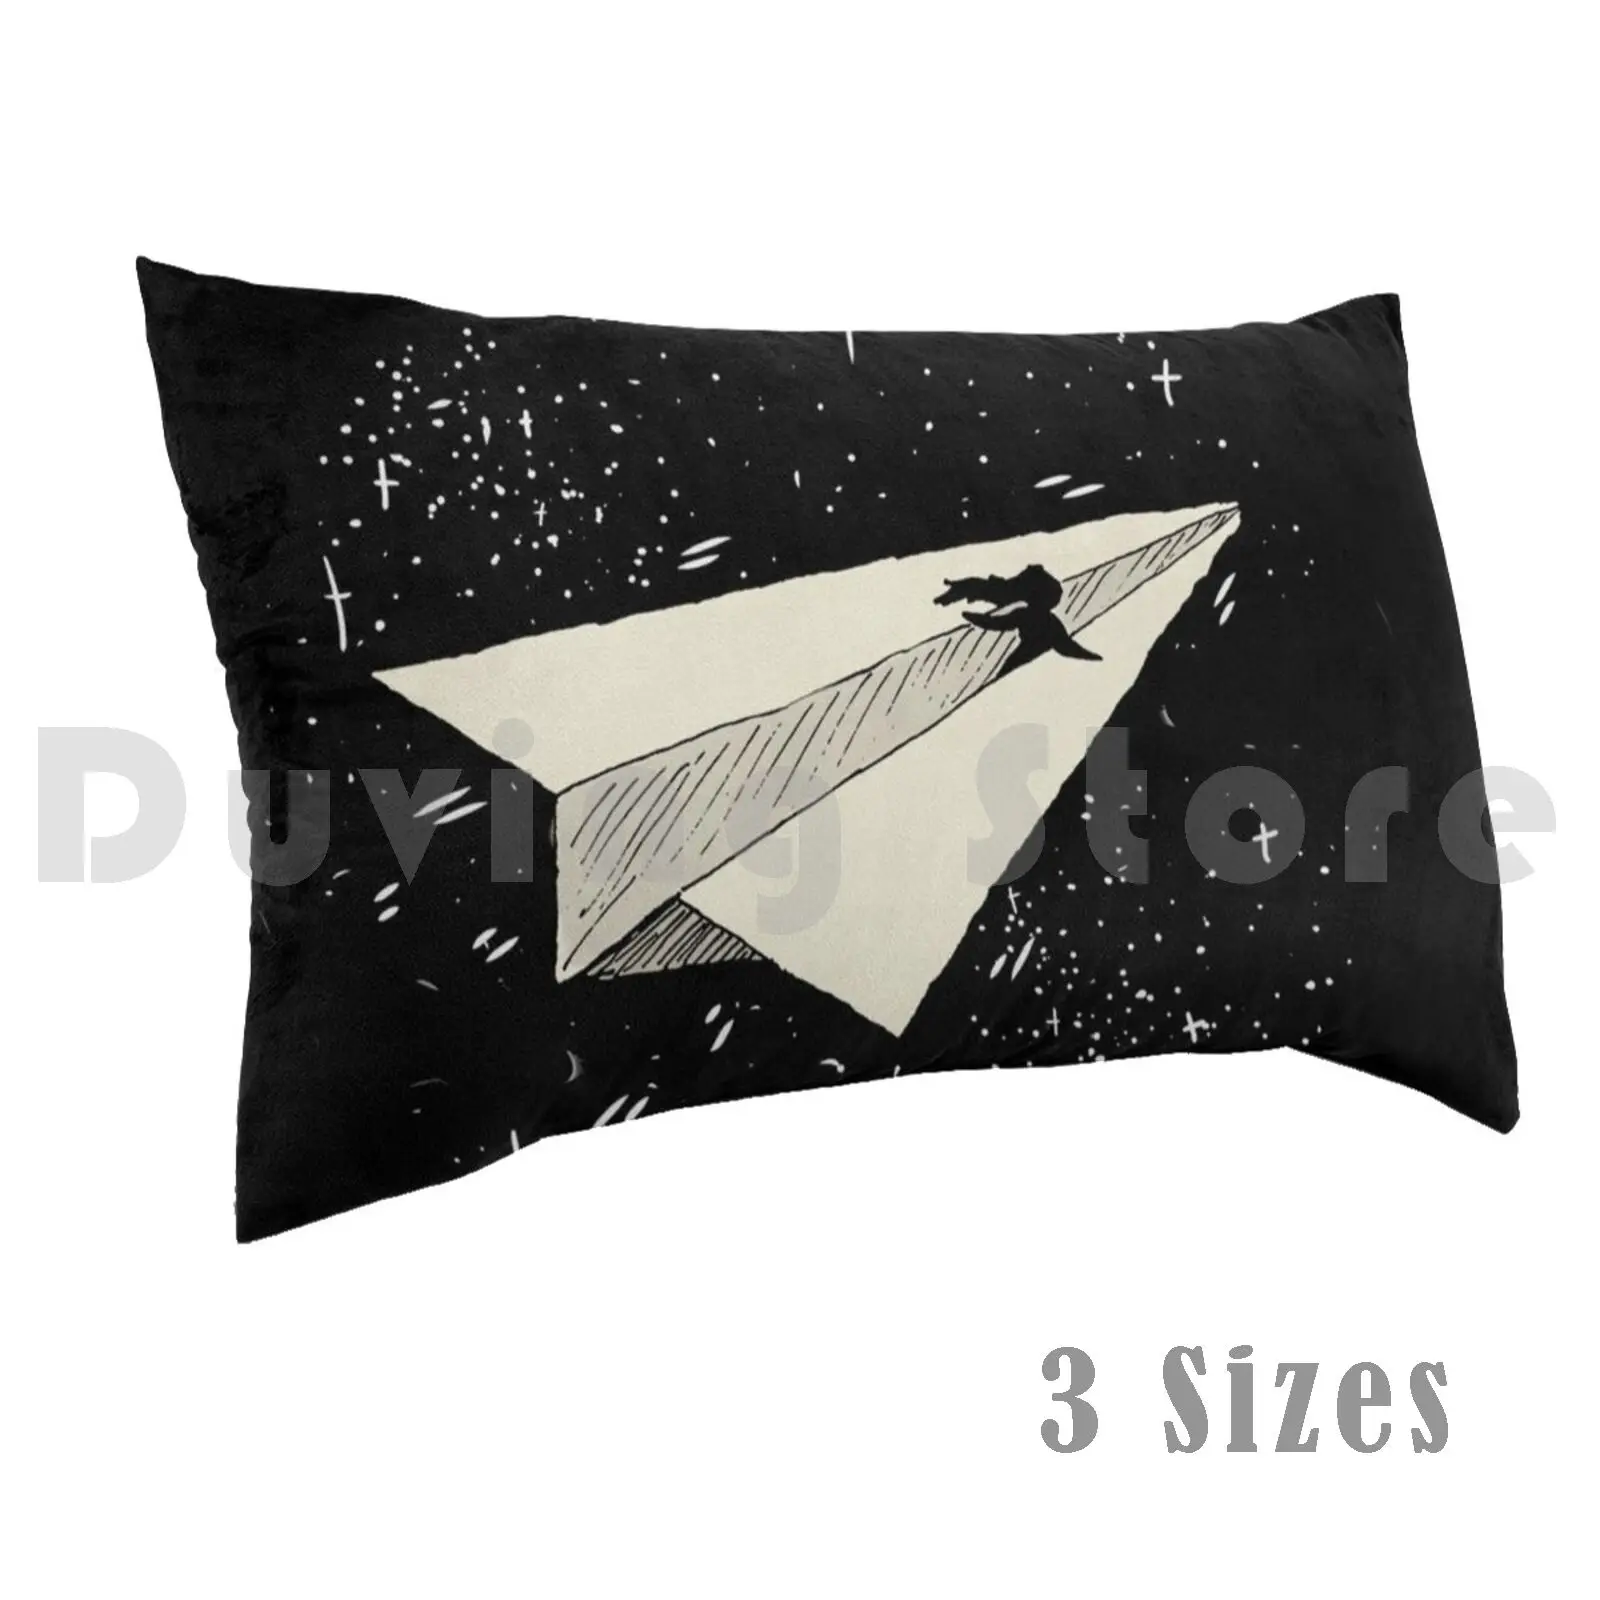 

Girl Riding Paper Airplane Through Starry Sky Pillow Case DIY 40x60 340 Paper Airplane Paper Airplane